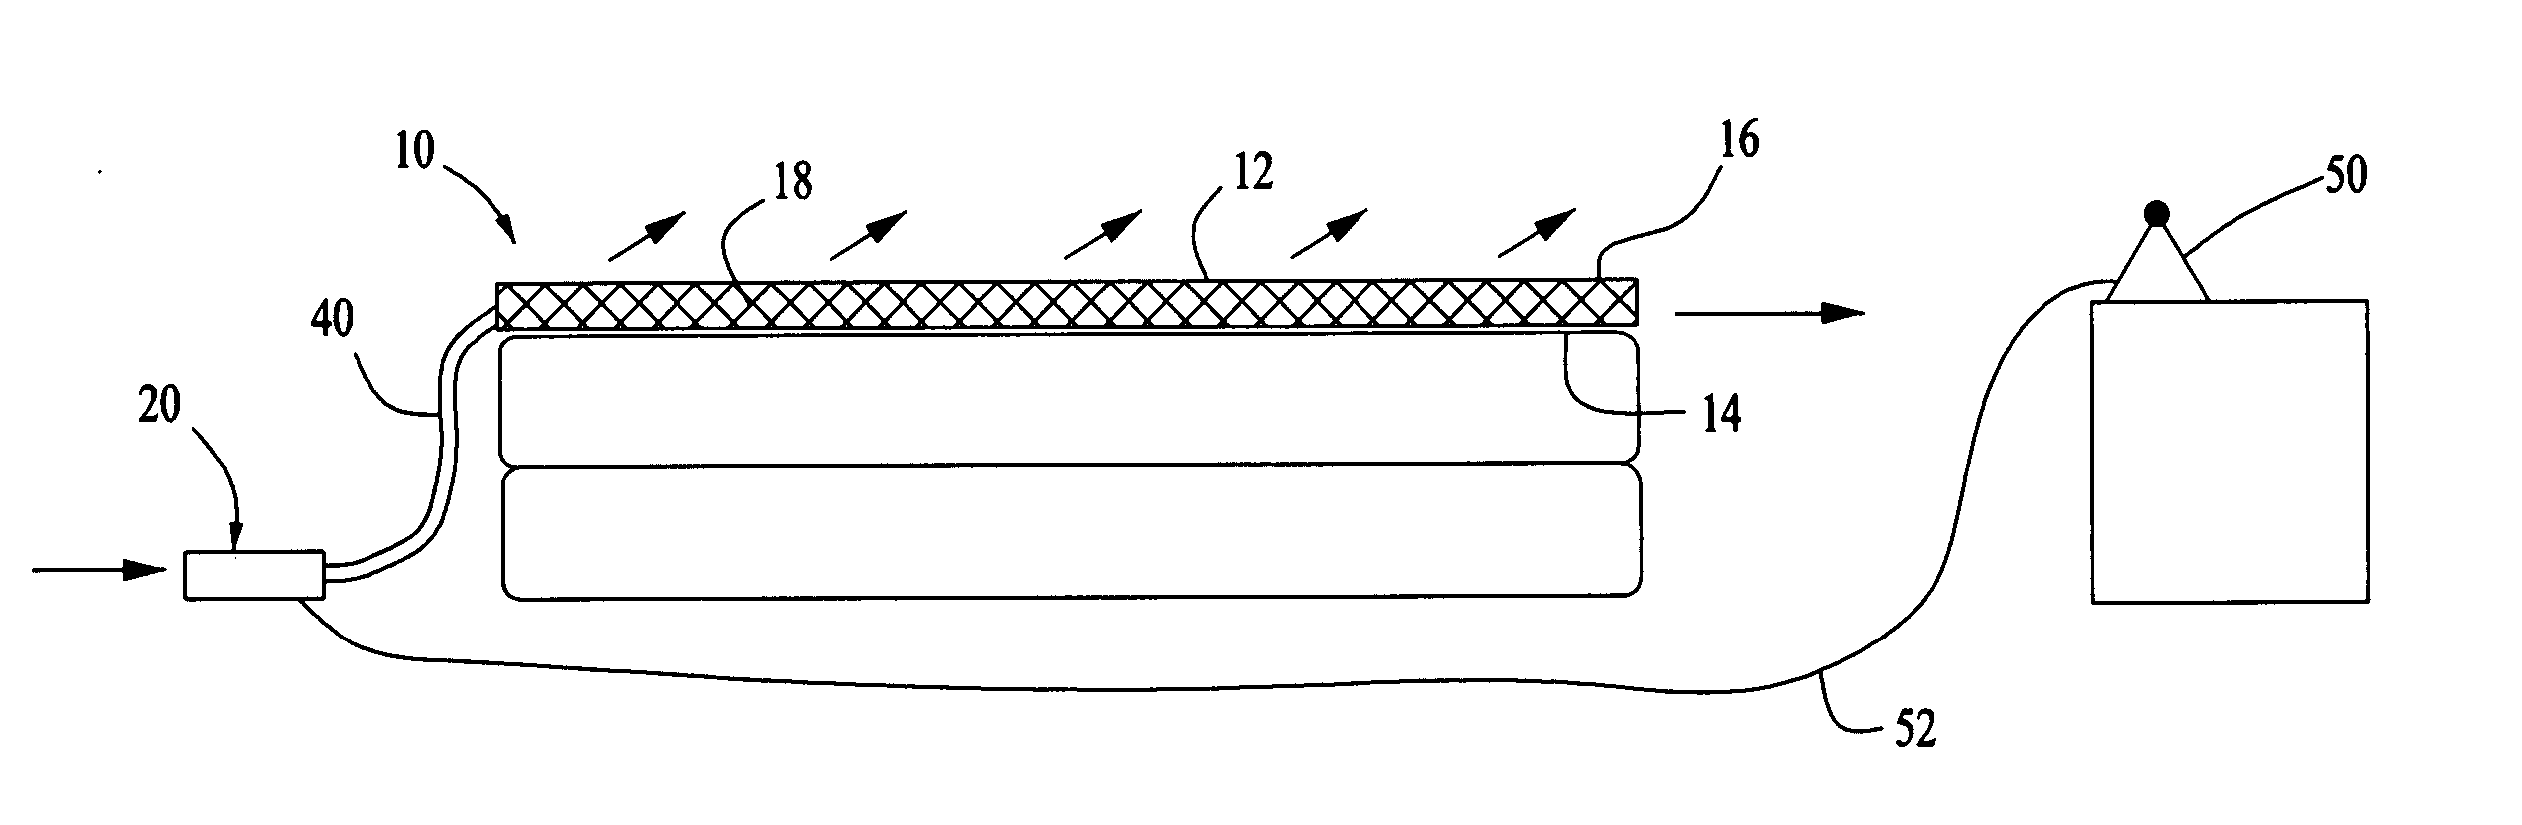 Convective cushion with positive coefficient of resistance heating mode